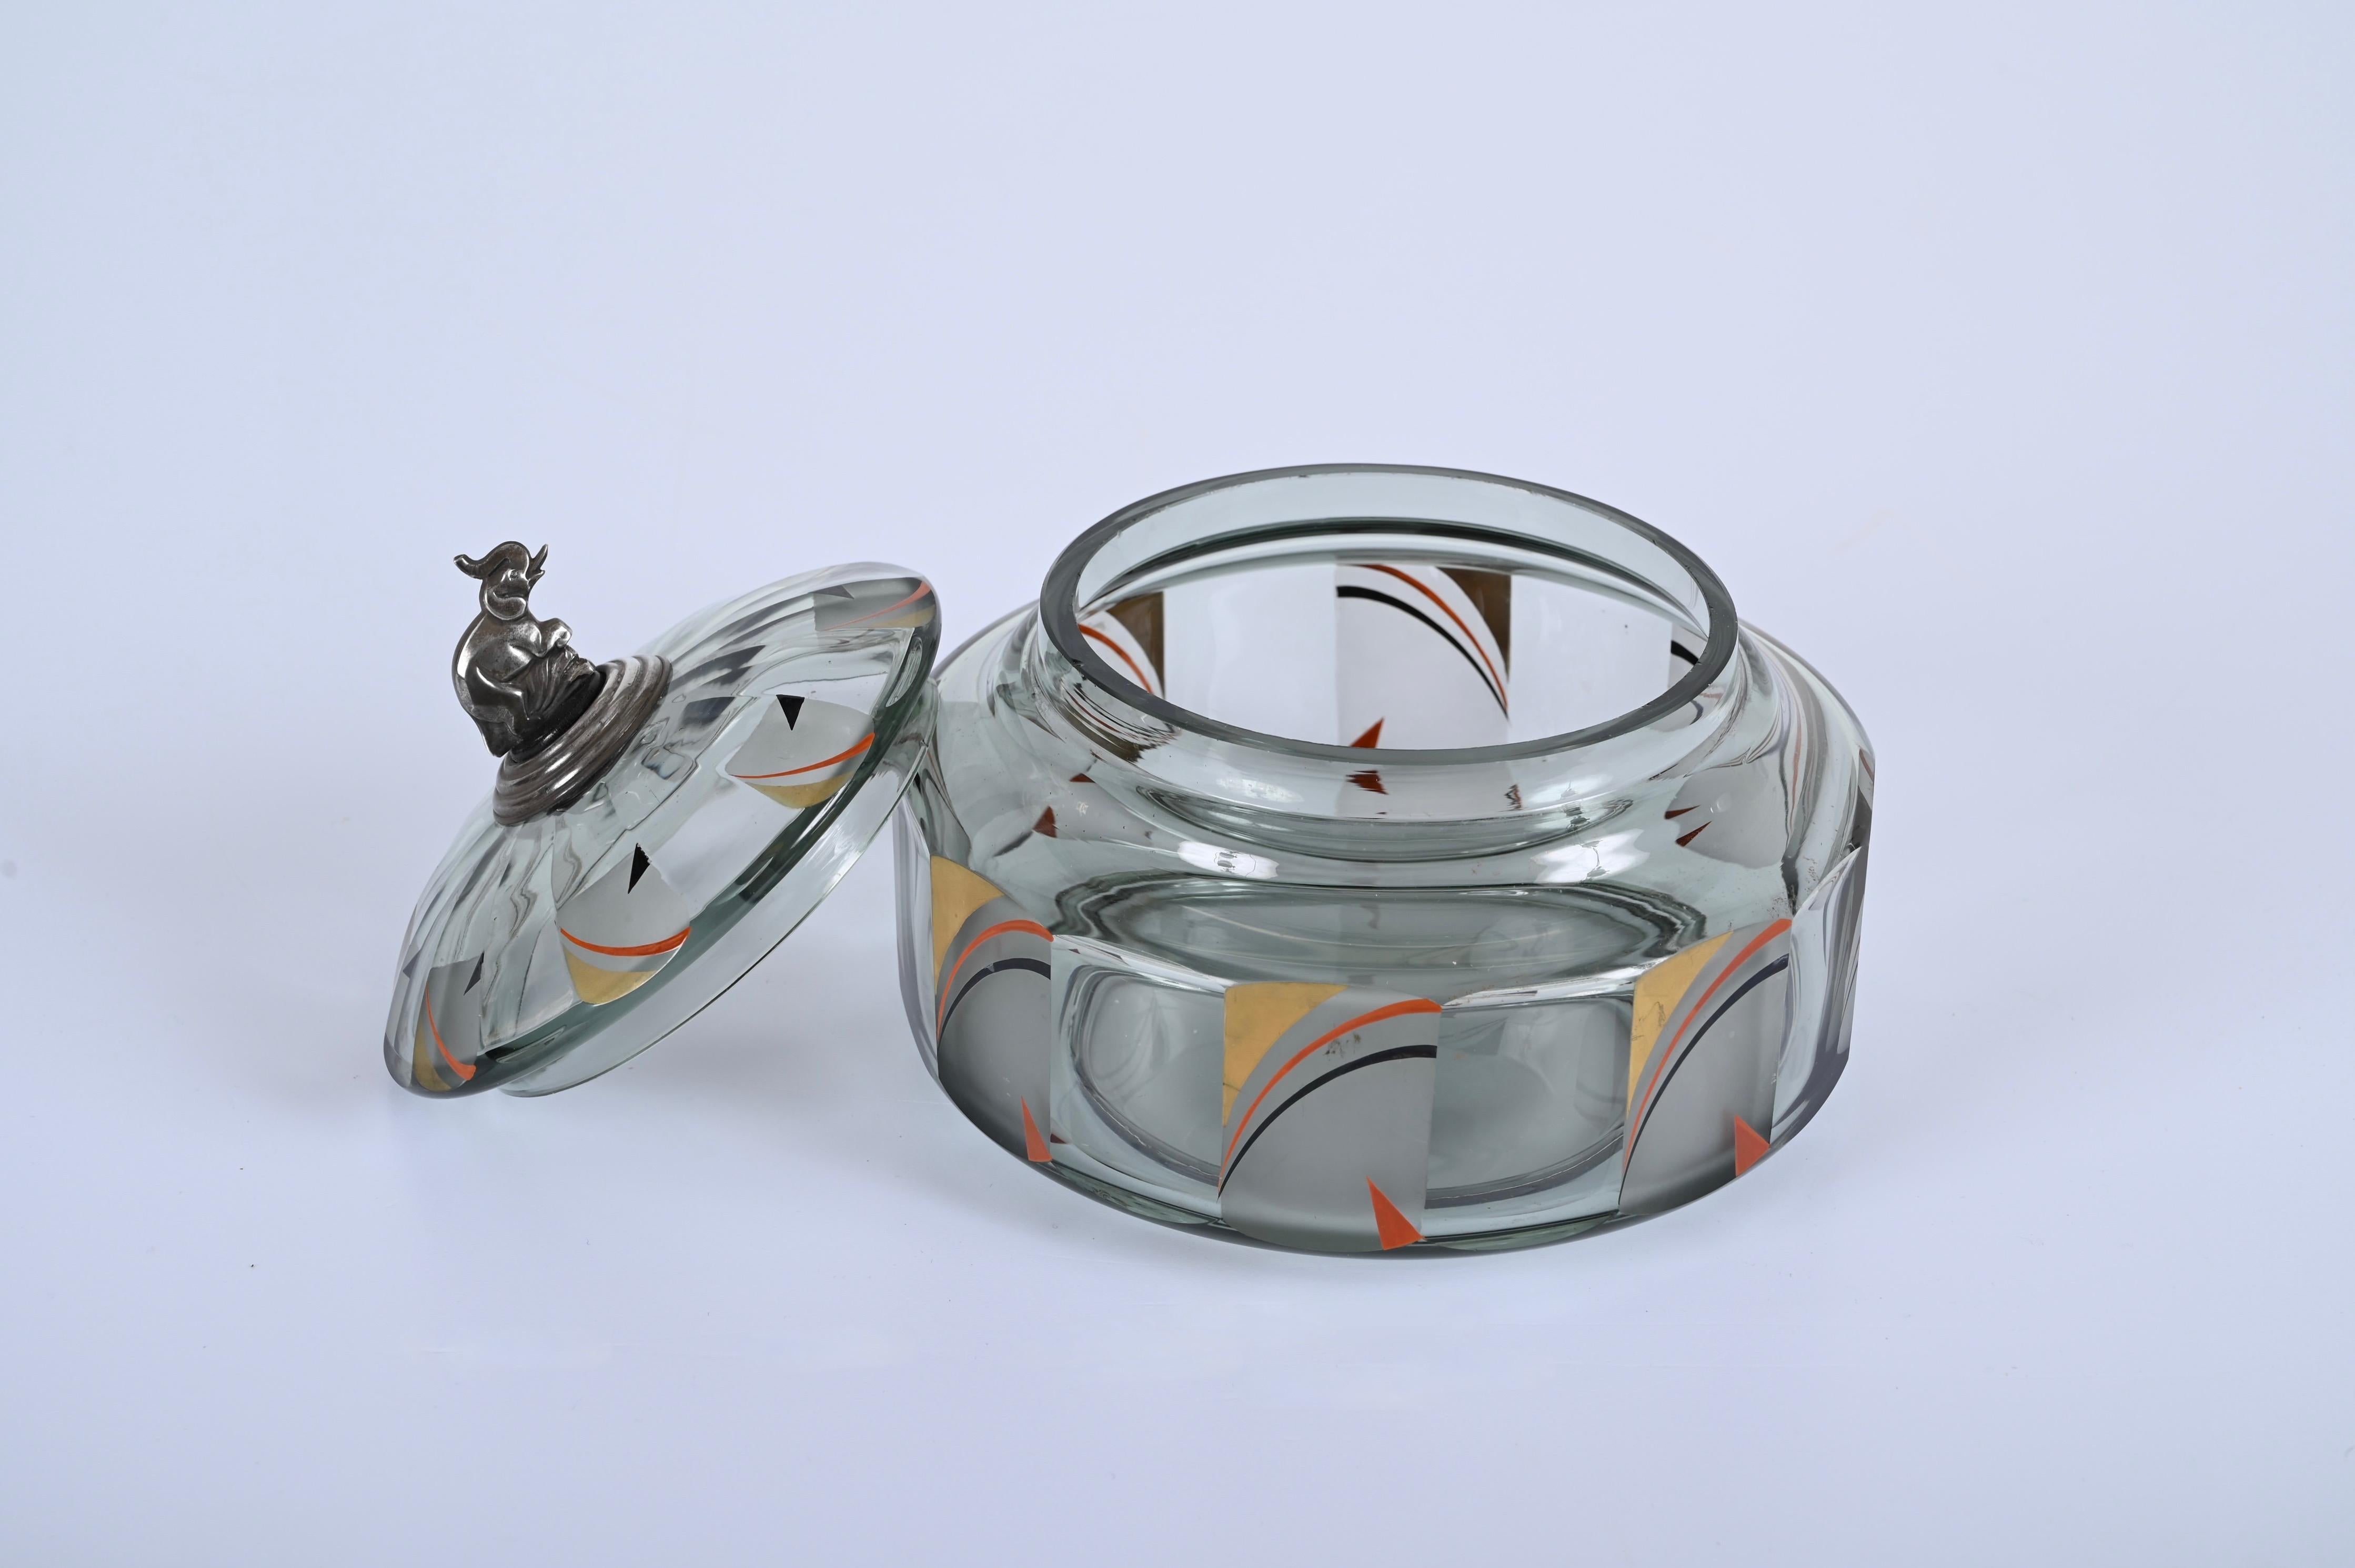 Italian Futurist Crystal Enameled Box with Silver Sculpture, Italy, 1933 For Sale 7